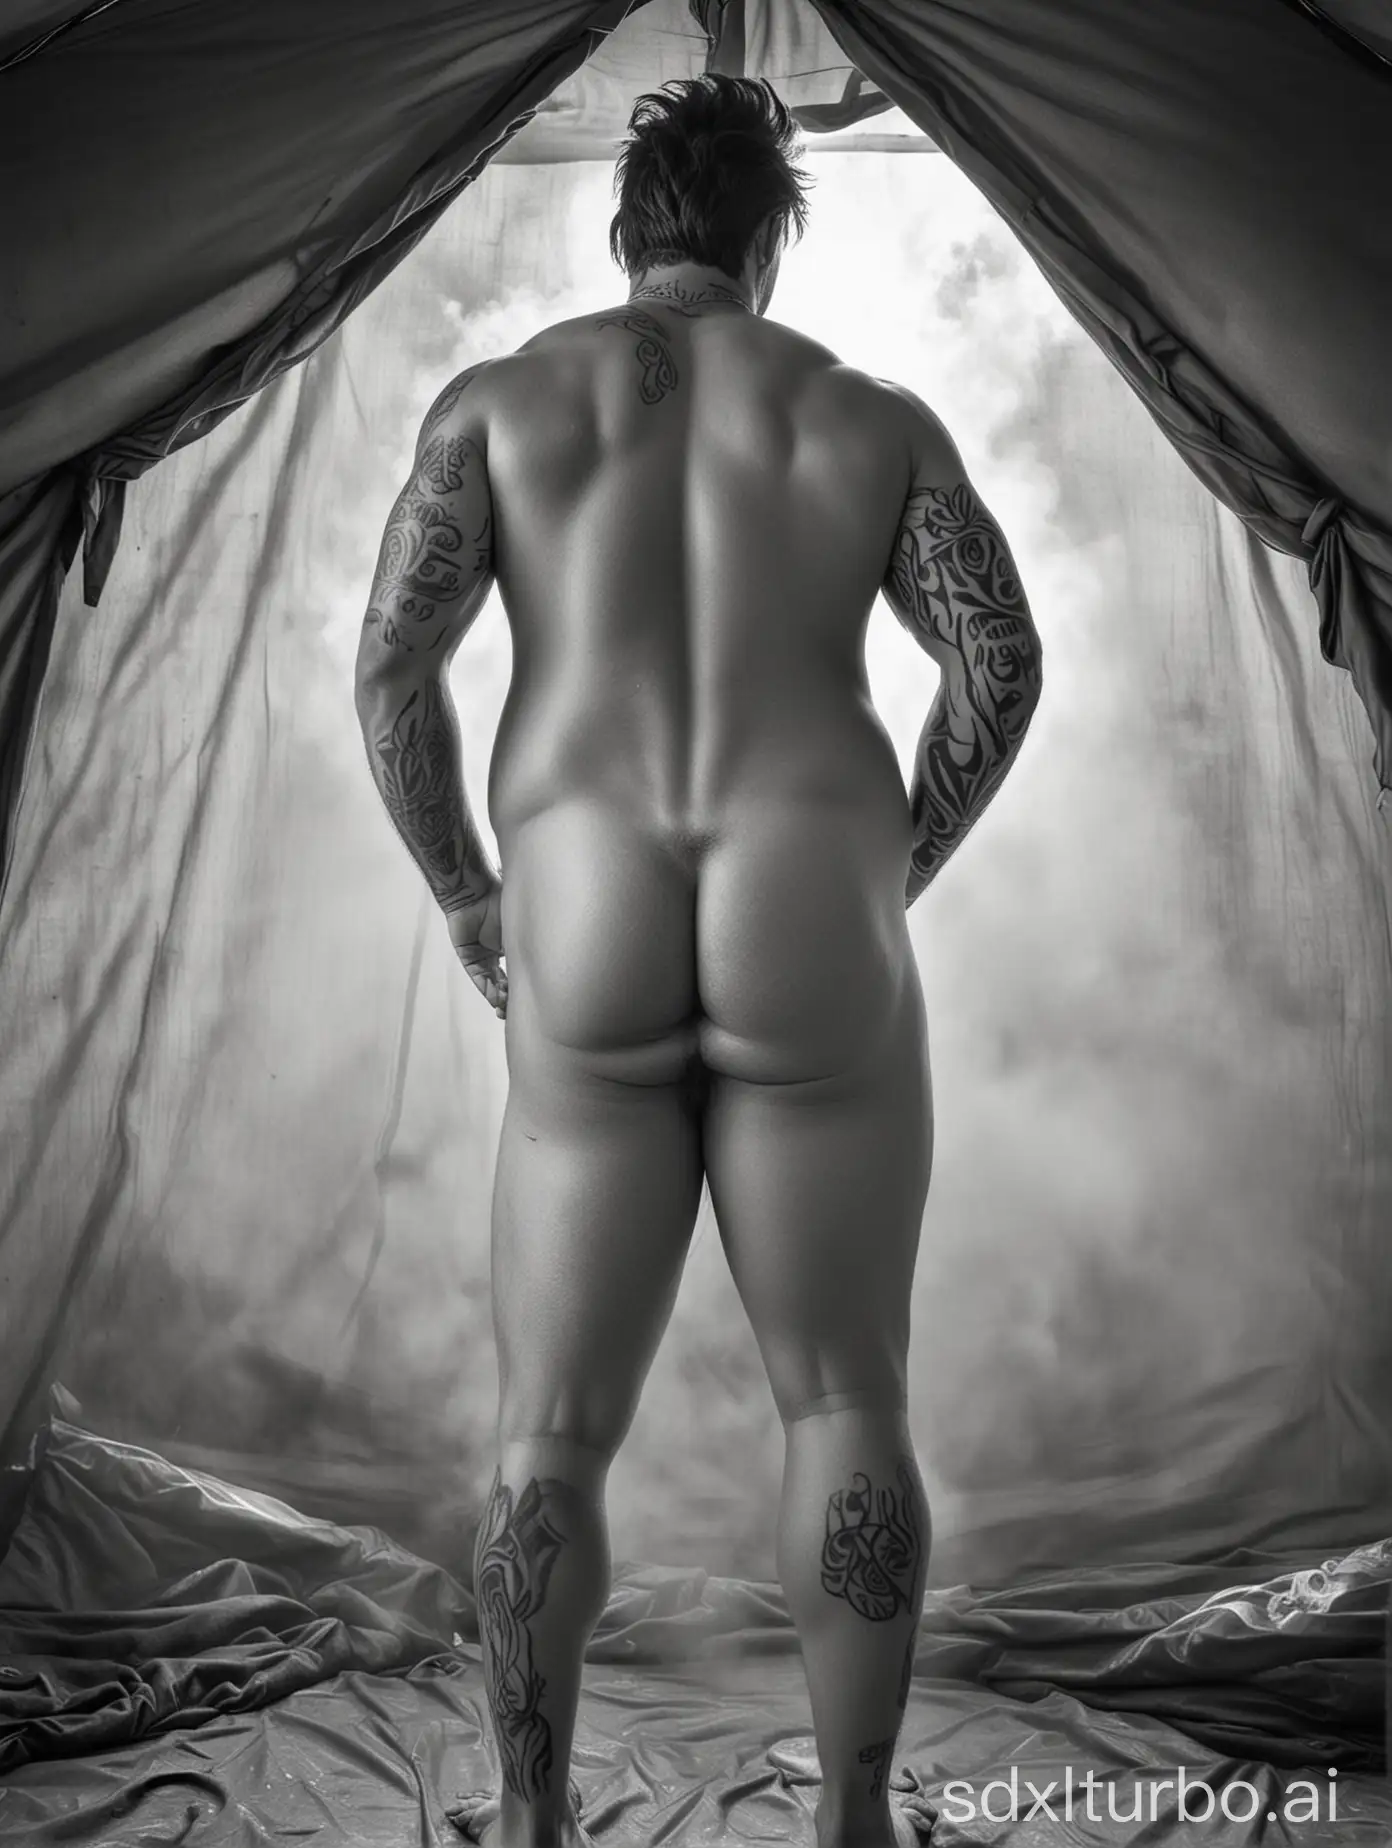 a tall chubby tanned and young man, brown mullet hair, from behind he shows a big butt with mini tattoo, farting while spreading green smoke on his ass, on an obscure environment tent, black and white style